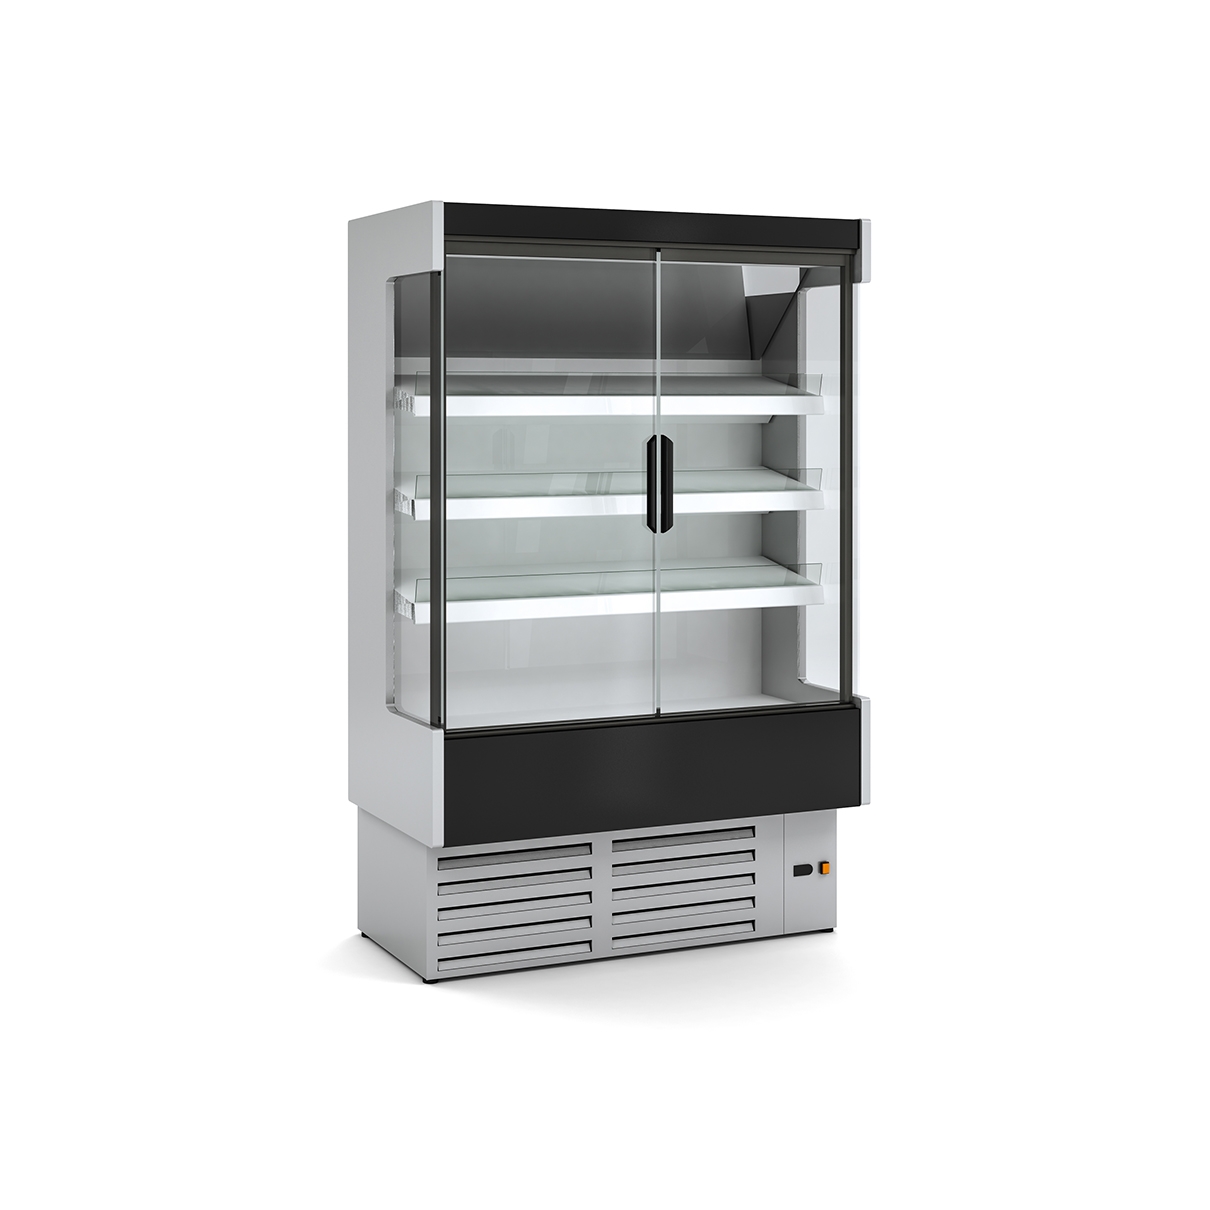 REFRIGERATED WALL-MOUNTED DISPLAY CABINET DG3 H1